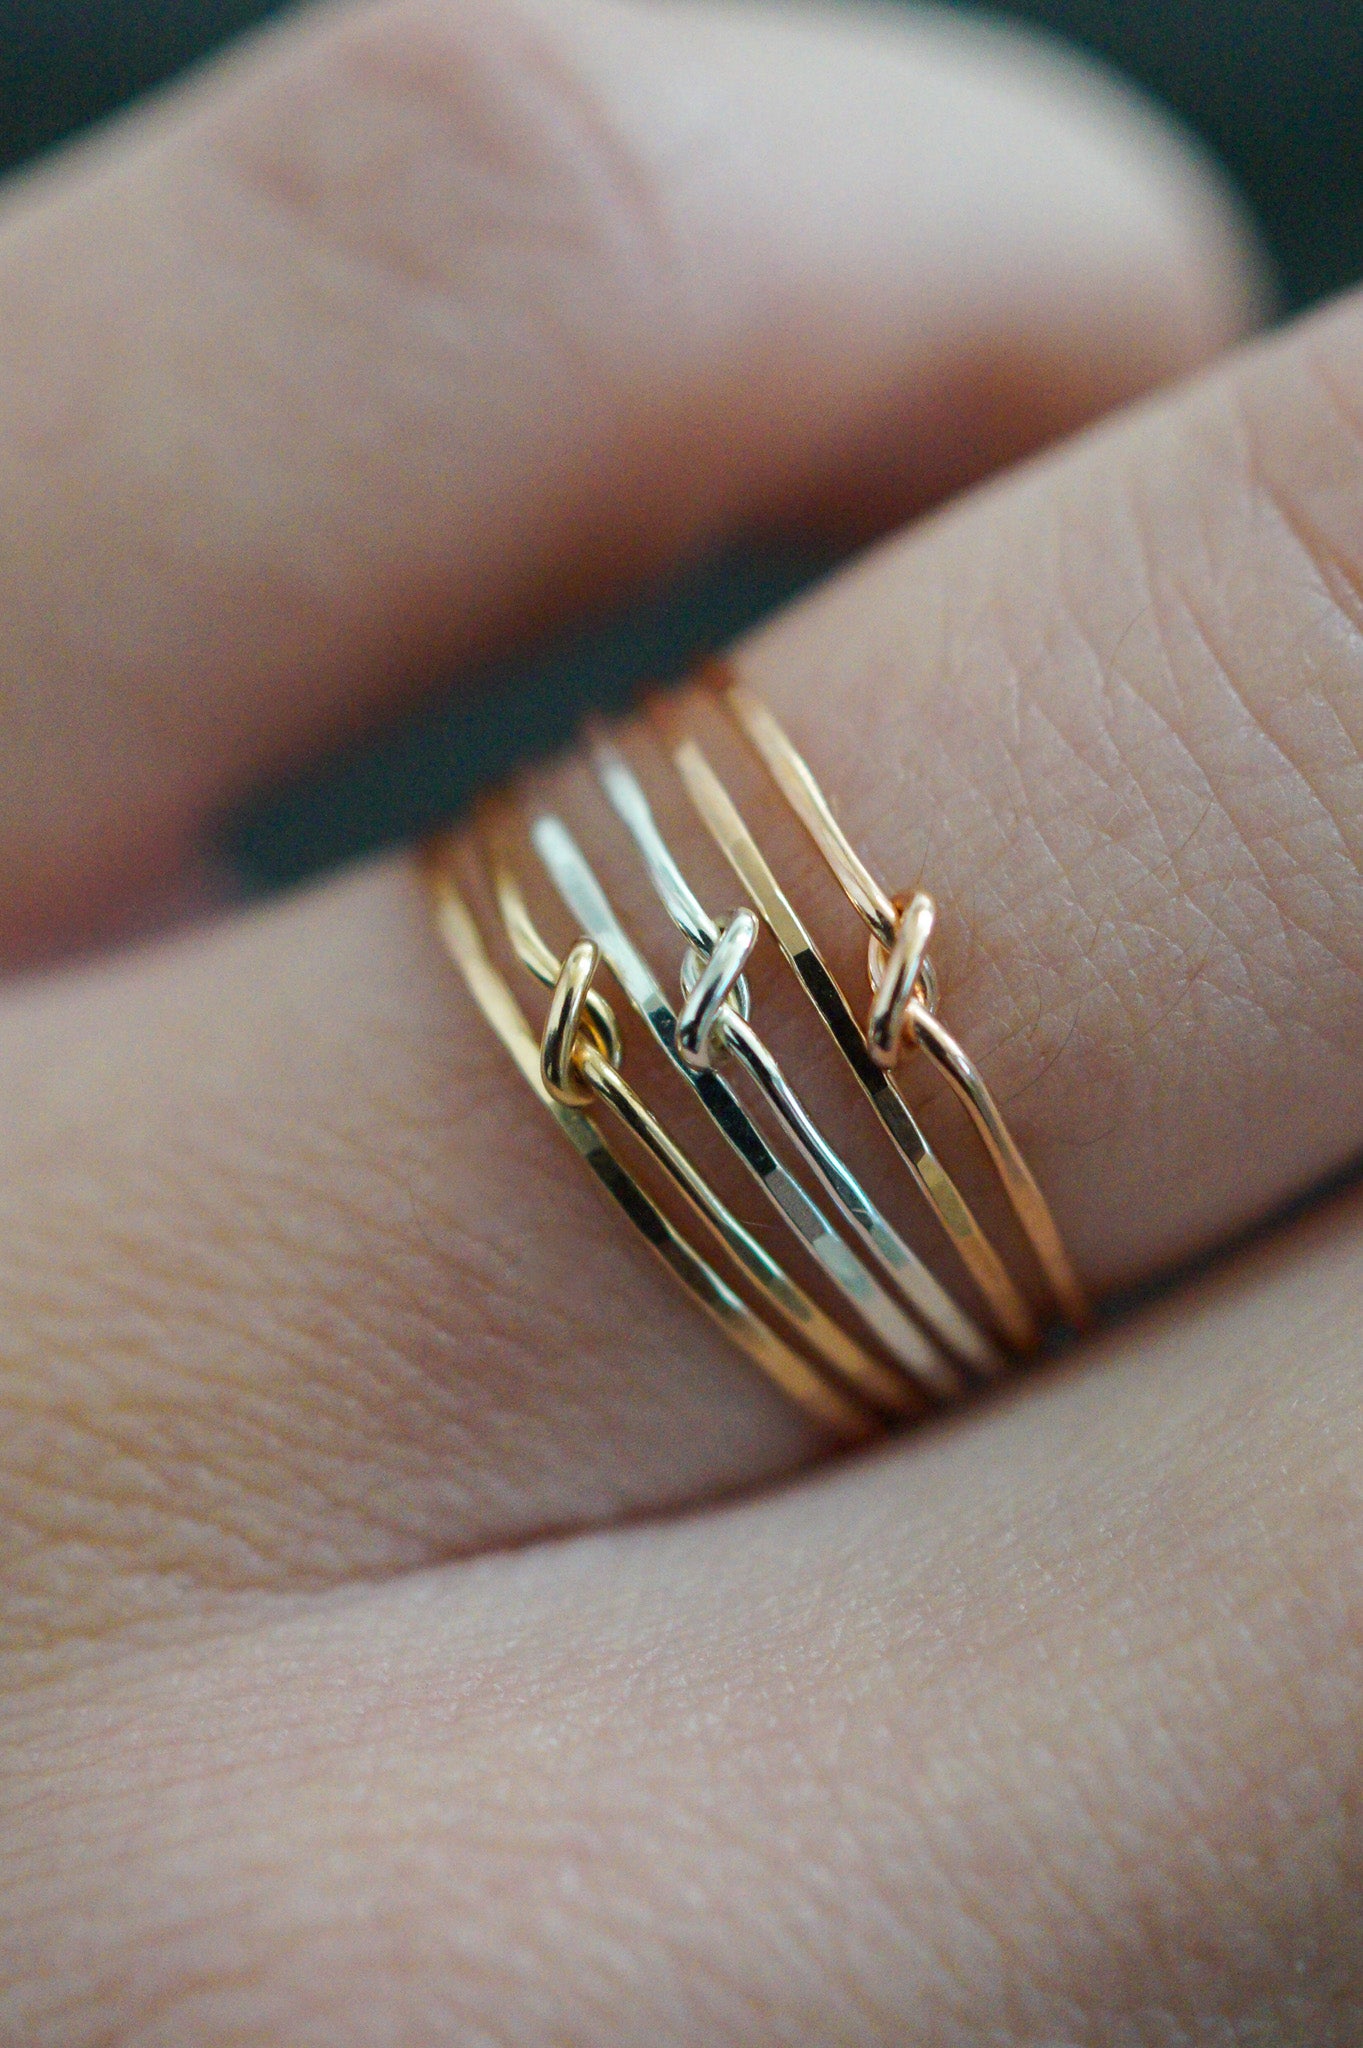 Thin Knot Set of 2 Stacking Rings, Gold Fill, Rose Gold Fill or Sterling Silver